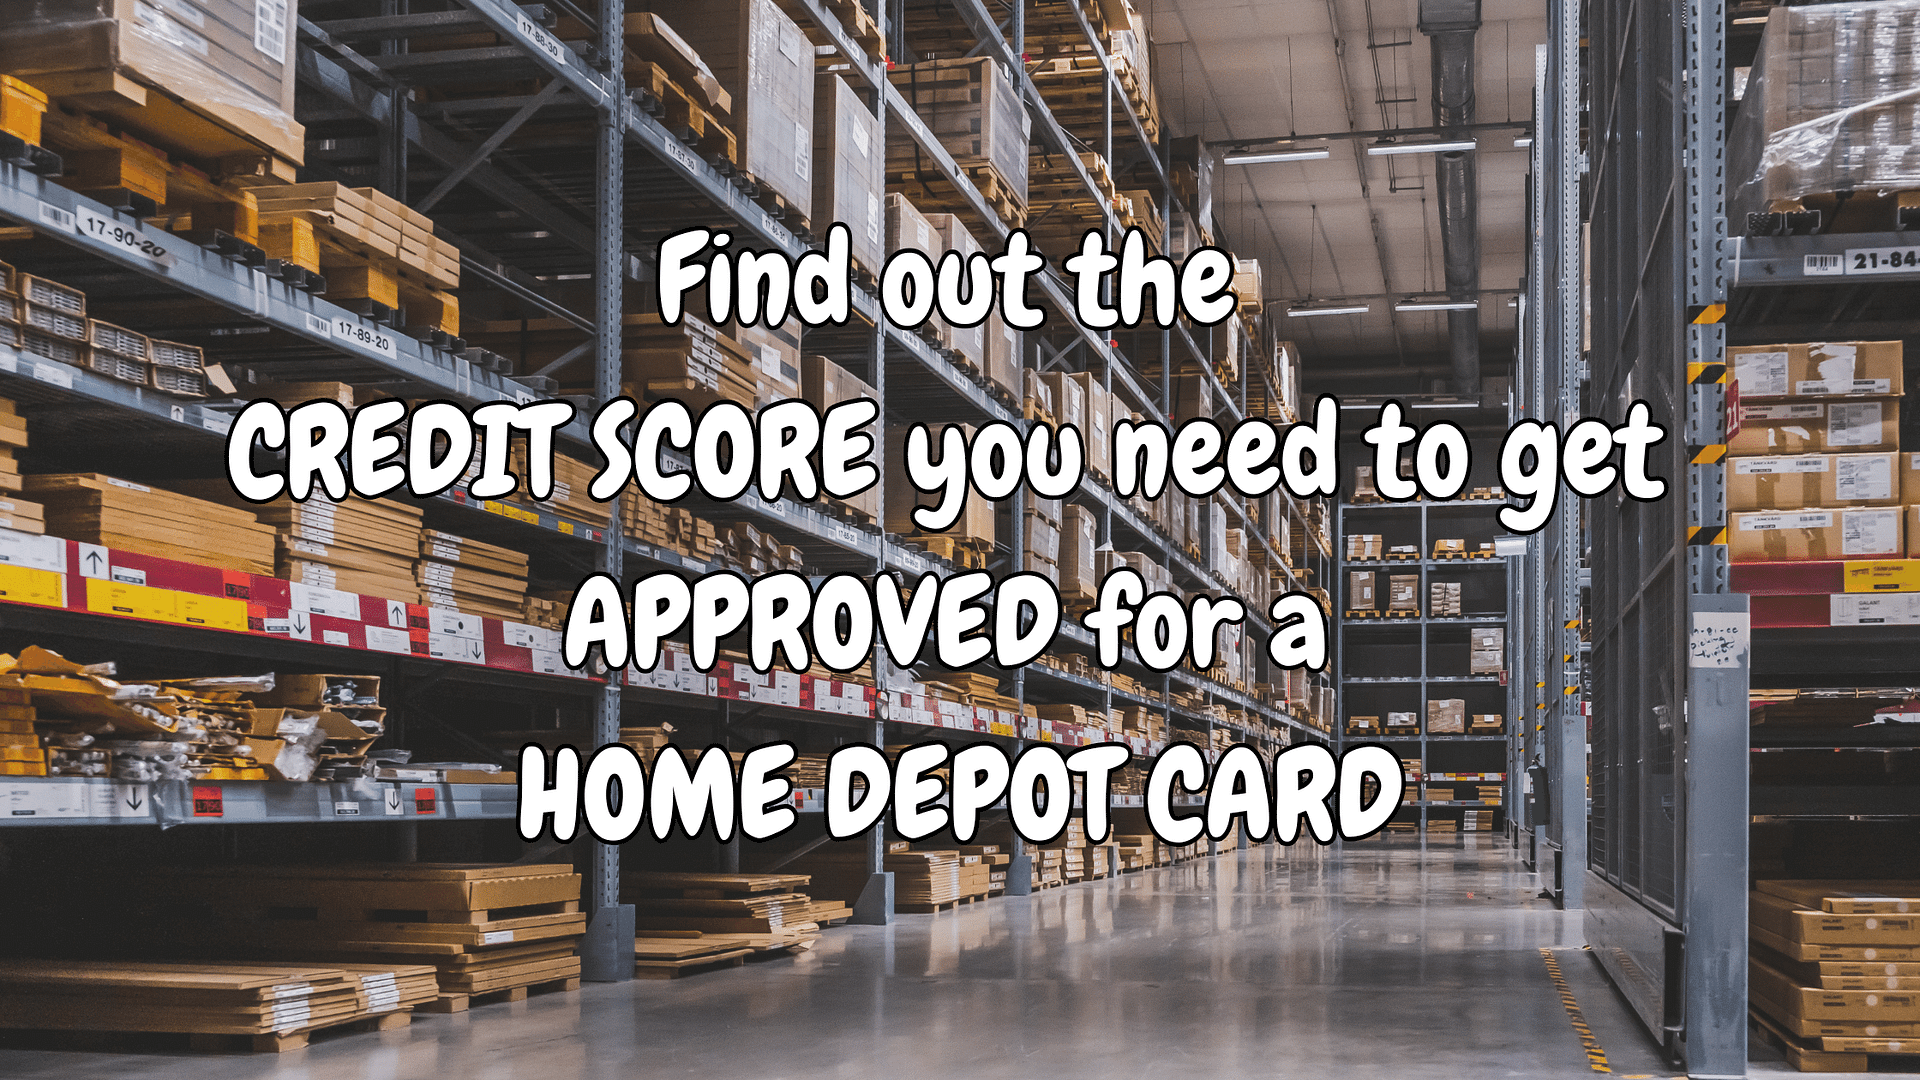 Find out the credit score you need to get approved for a Home Depot Card